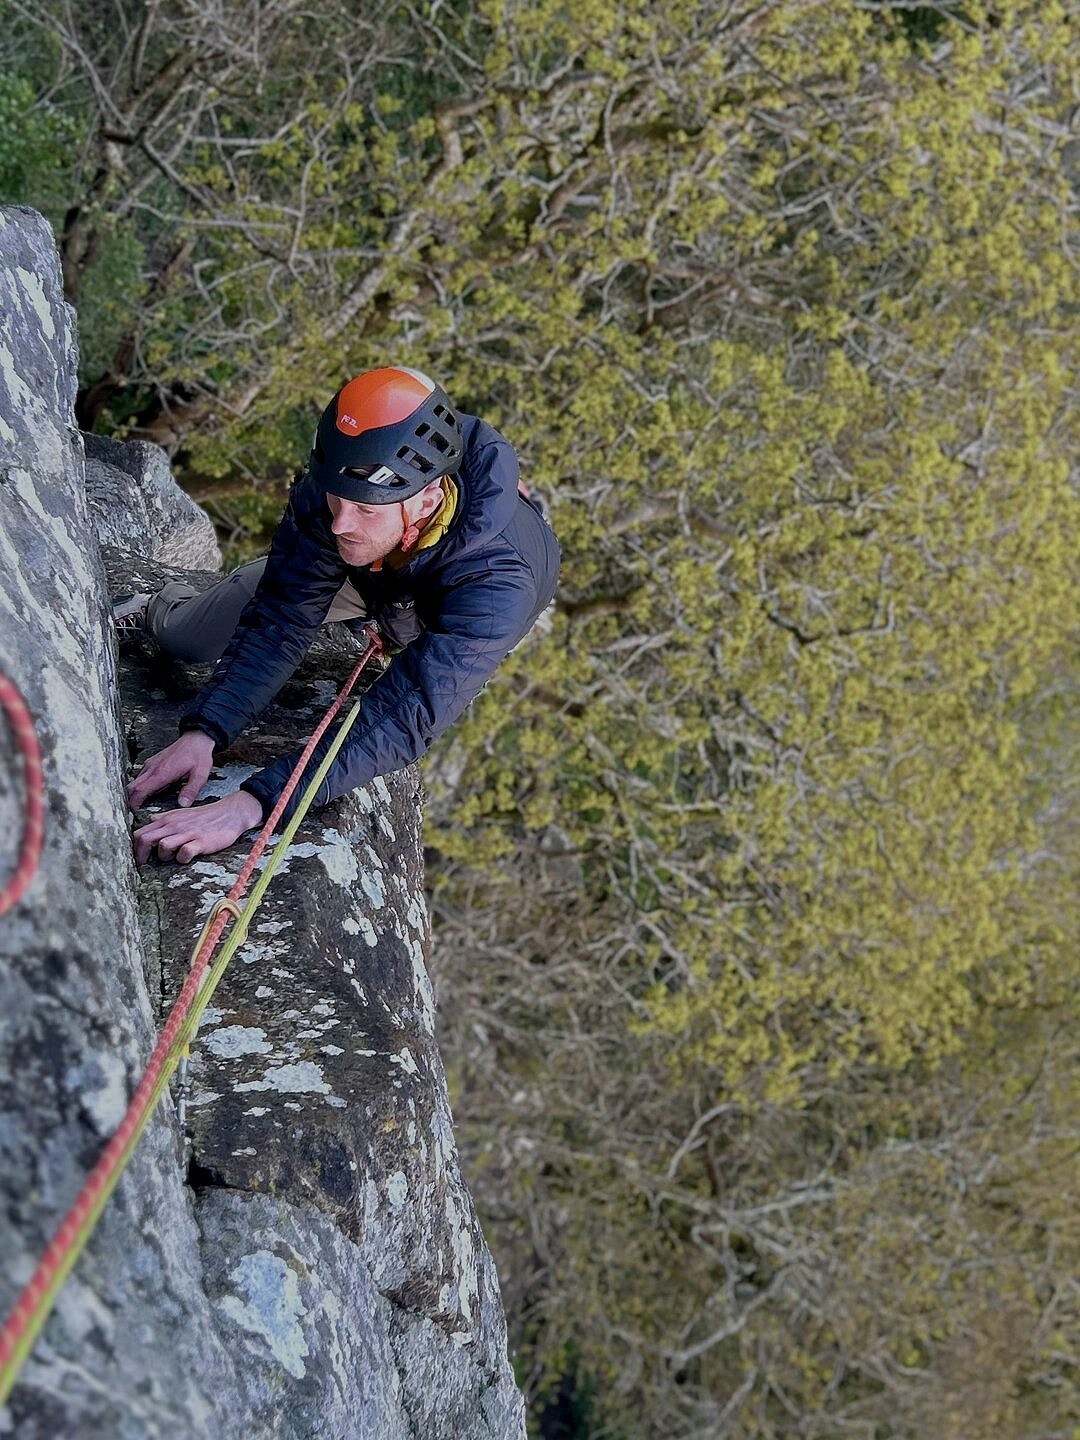 James coming up the first part of The Plum on Tremadog   © JackO3522